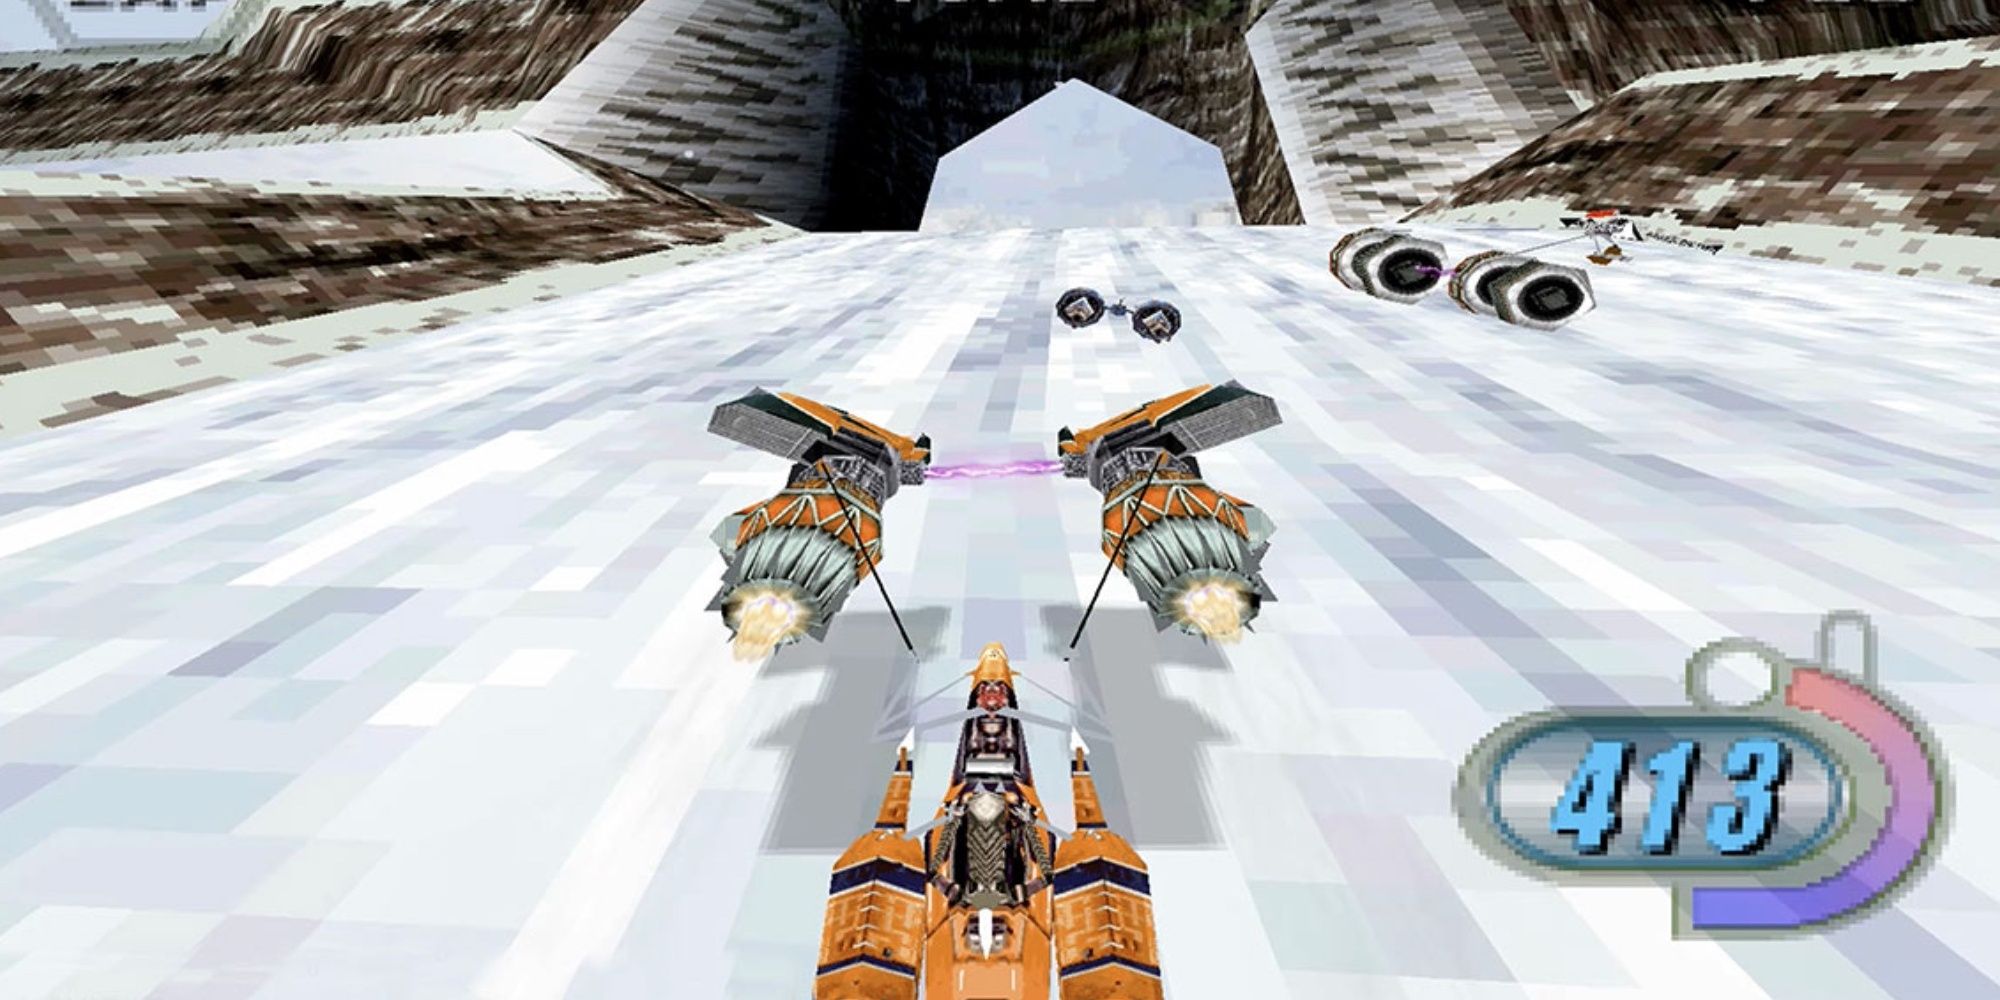 Sebulba's Pod flies to the finish with two other pods over a snowy track in Star Wars Ep 1 Racer.